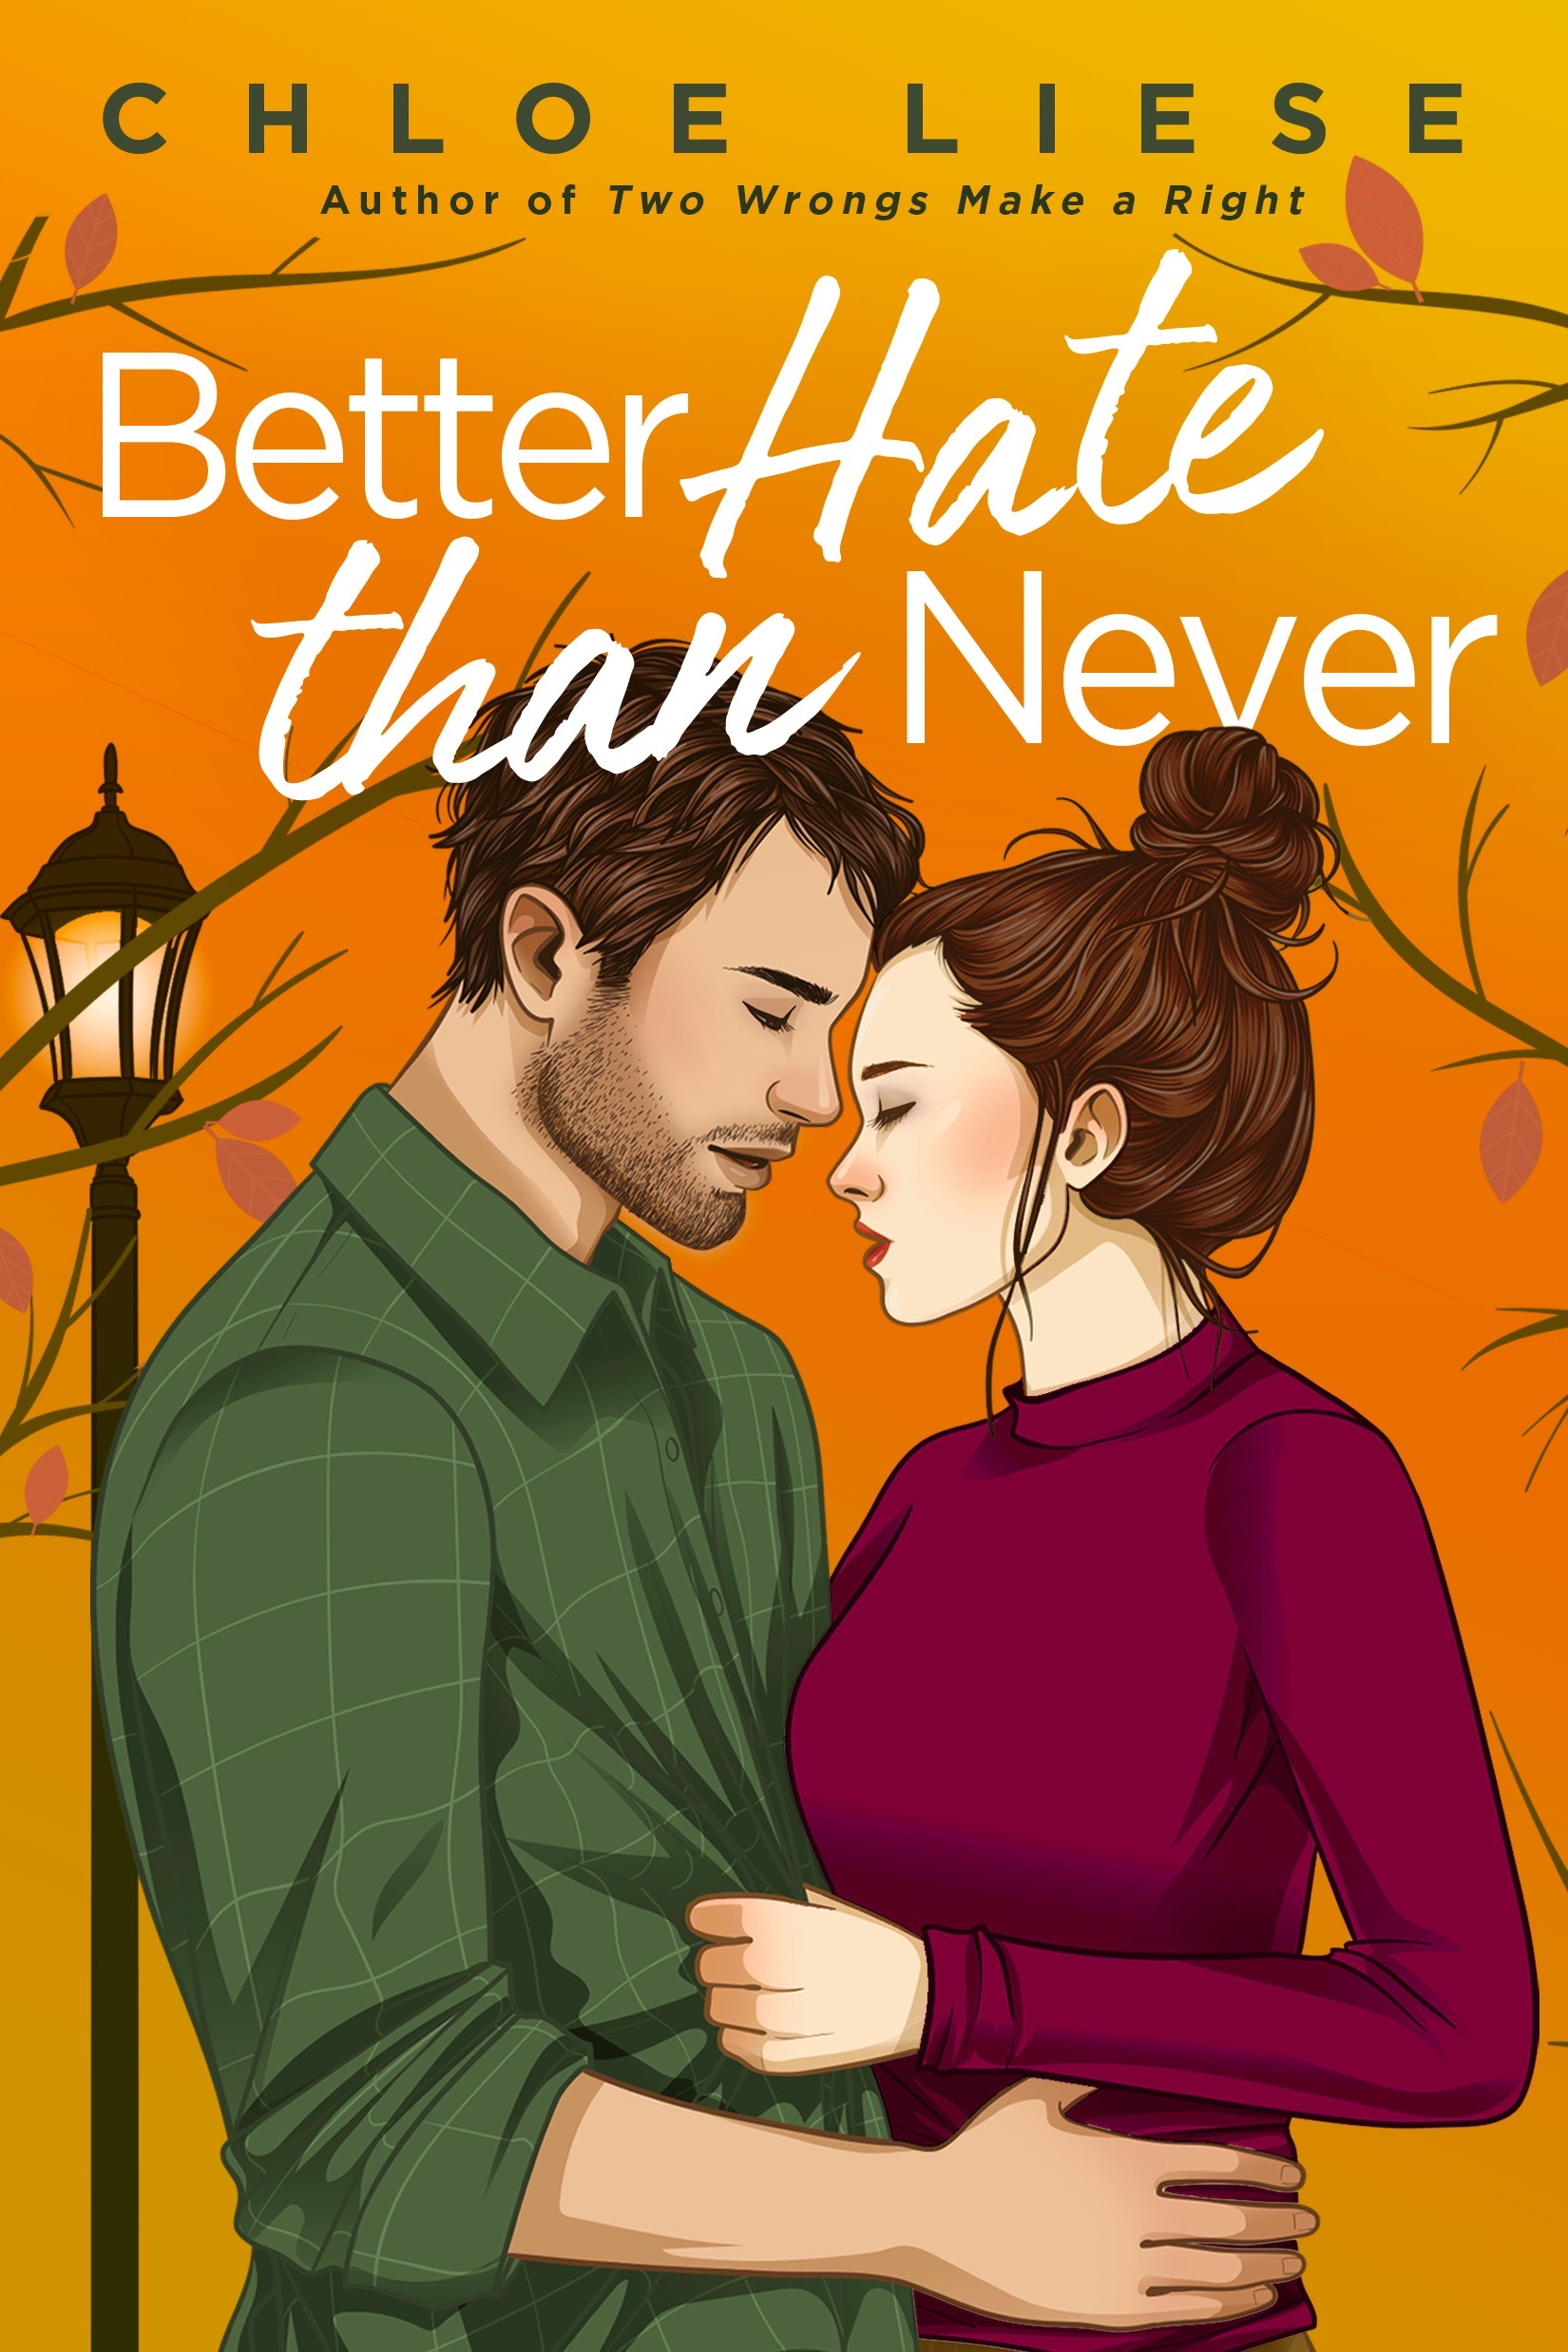 Better Hate than Never (The Wilmot Sisters, #2)